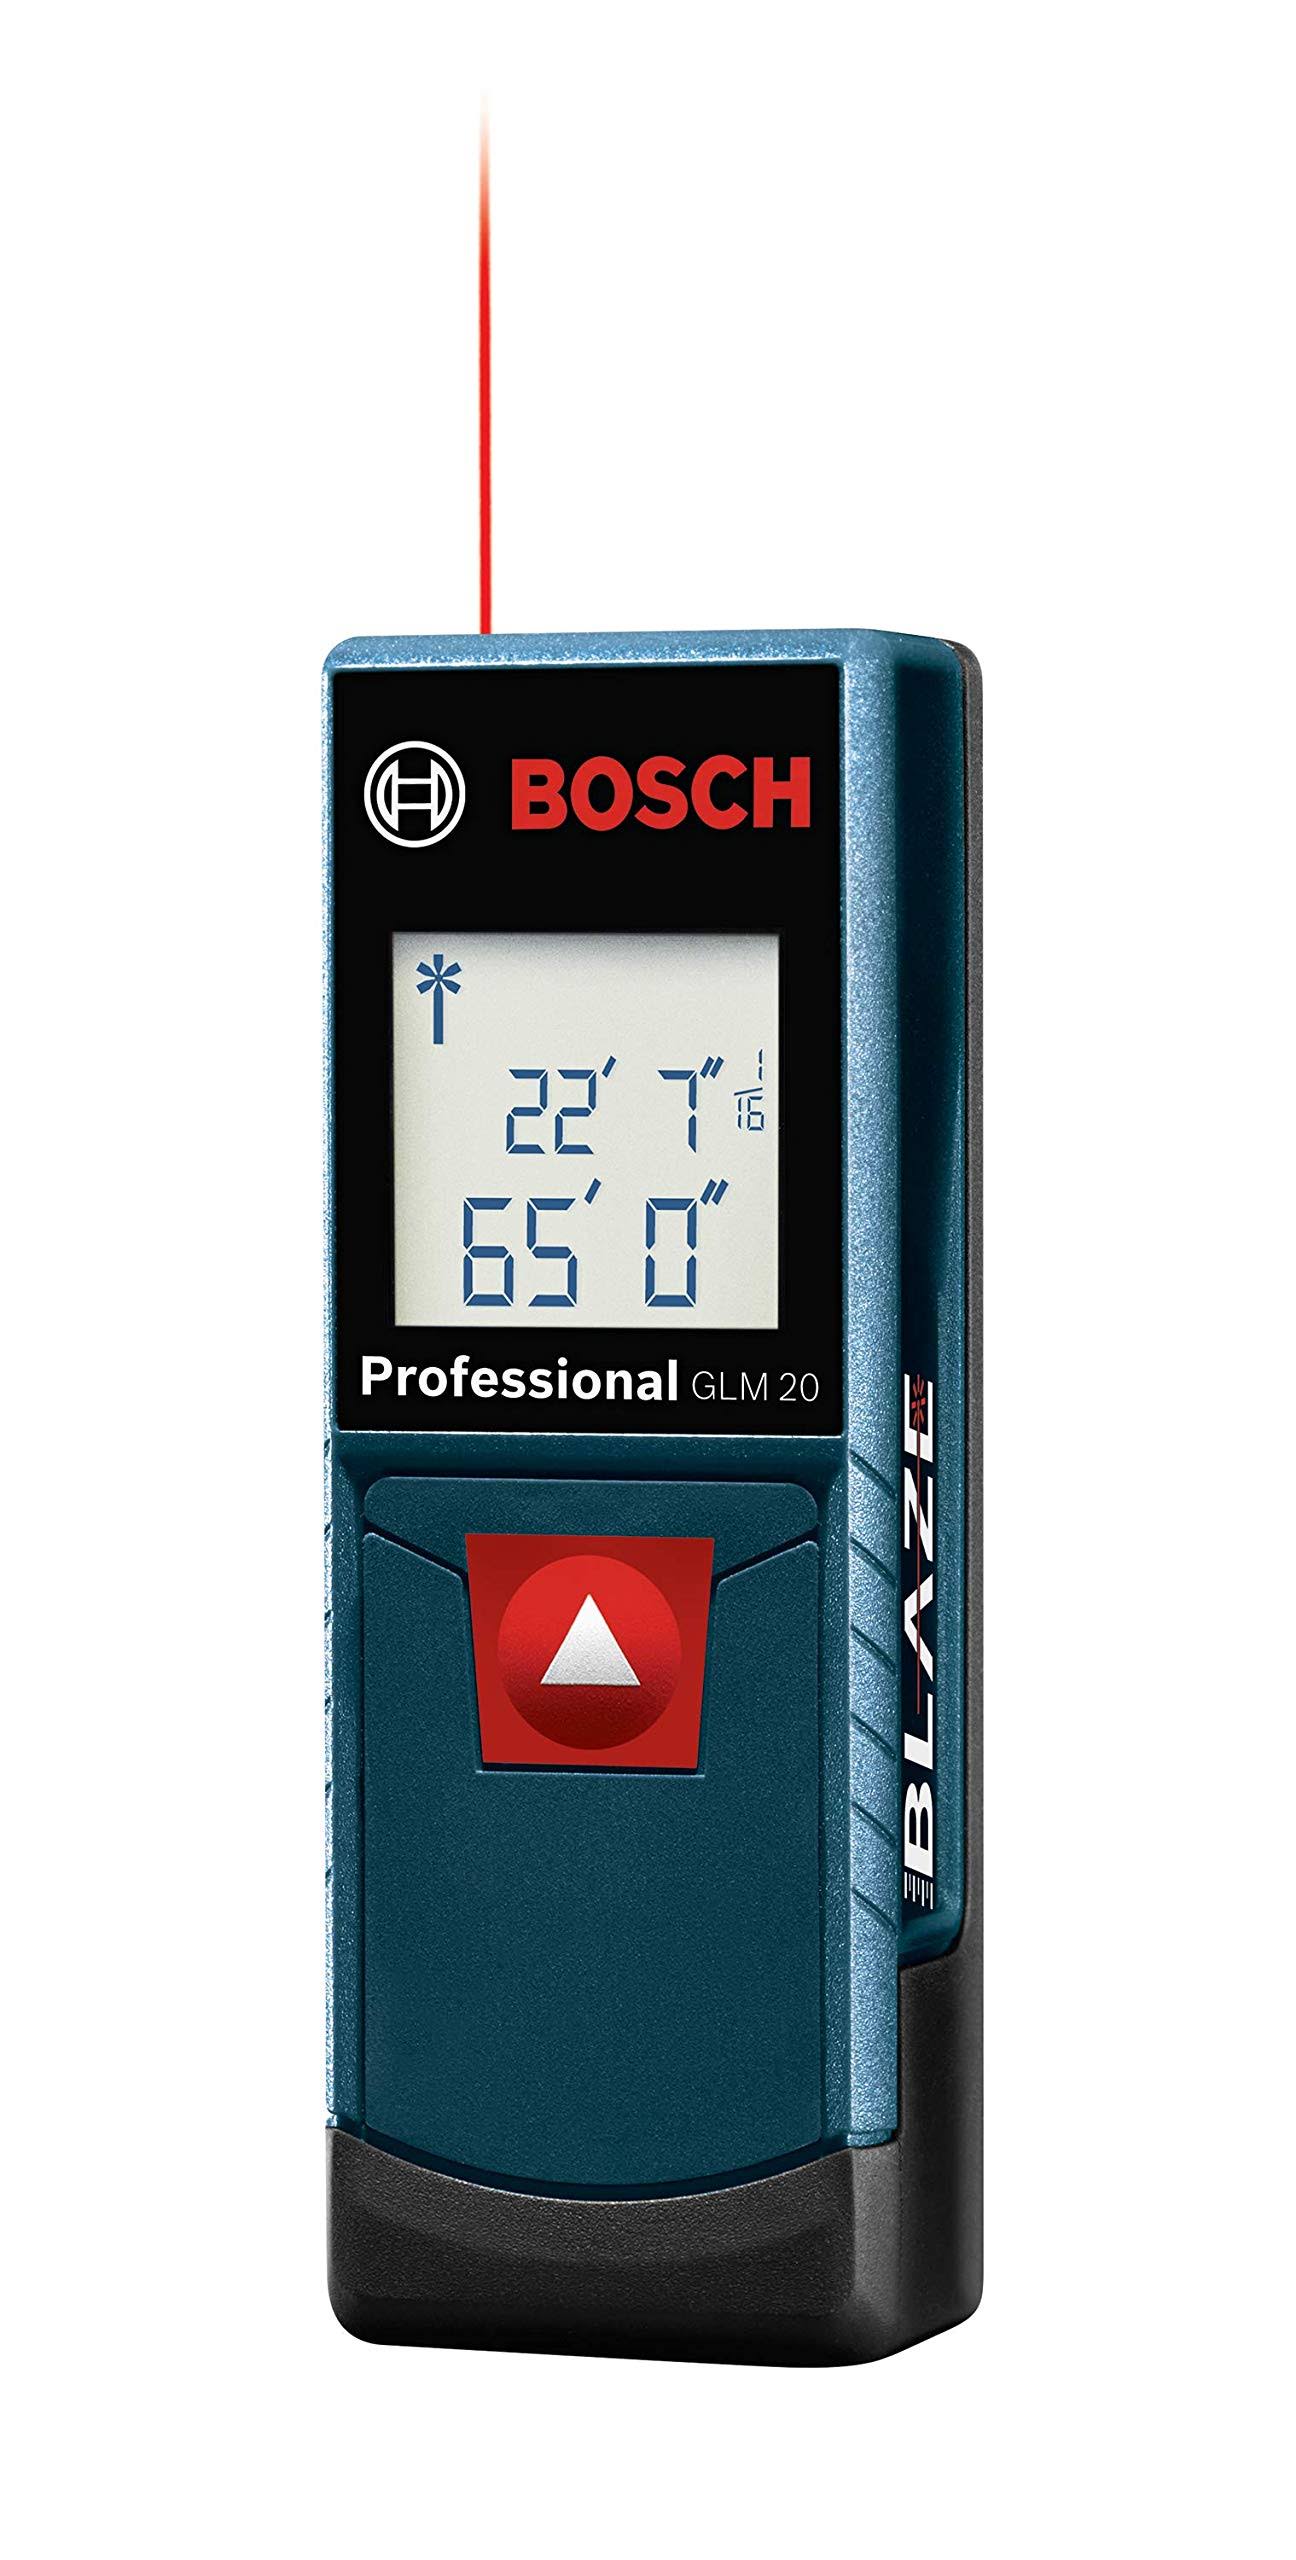 Bosch GLM 20 Compact Laser Measure with Backlit Display